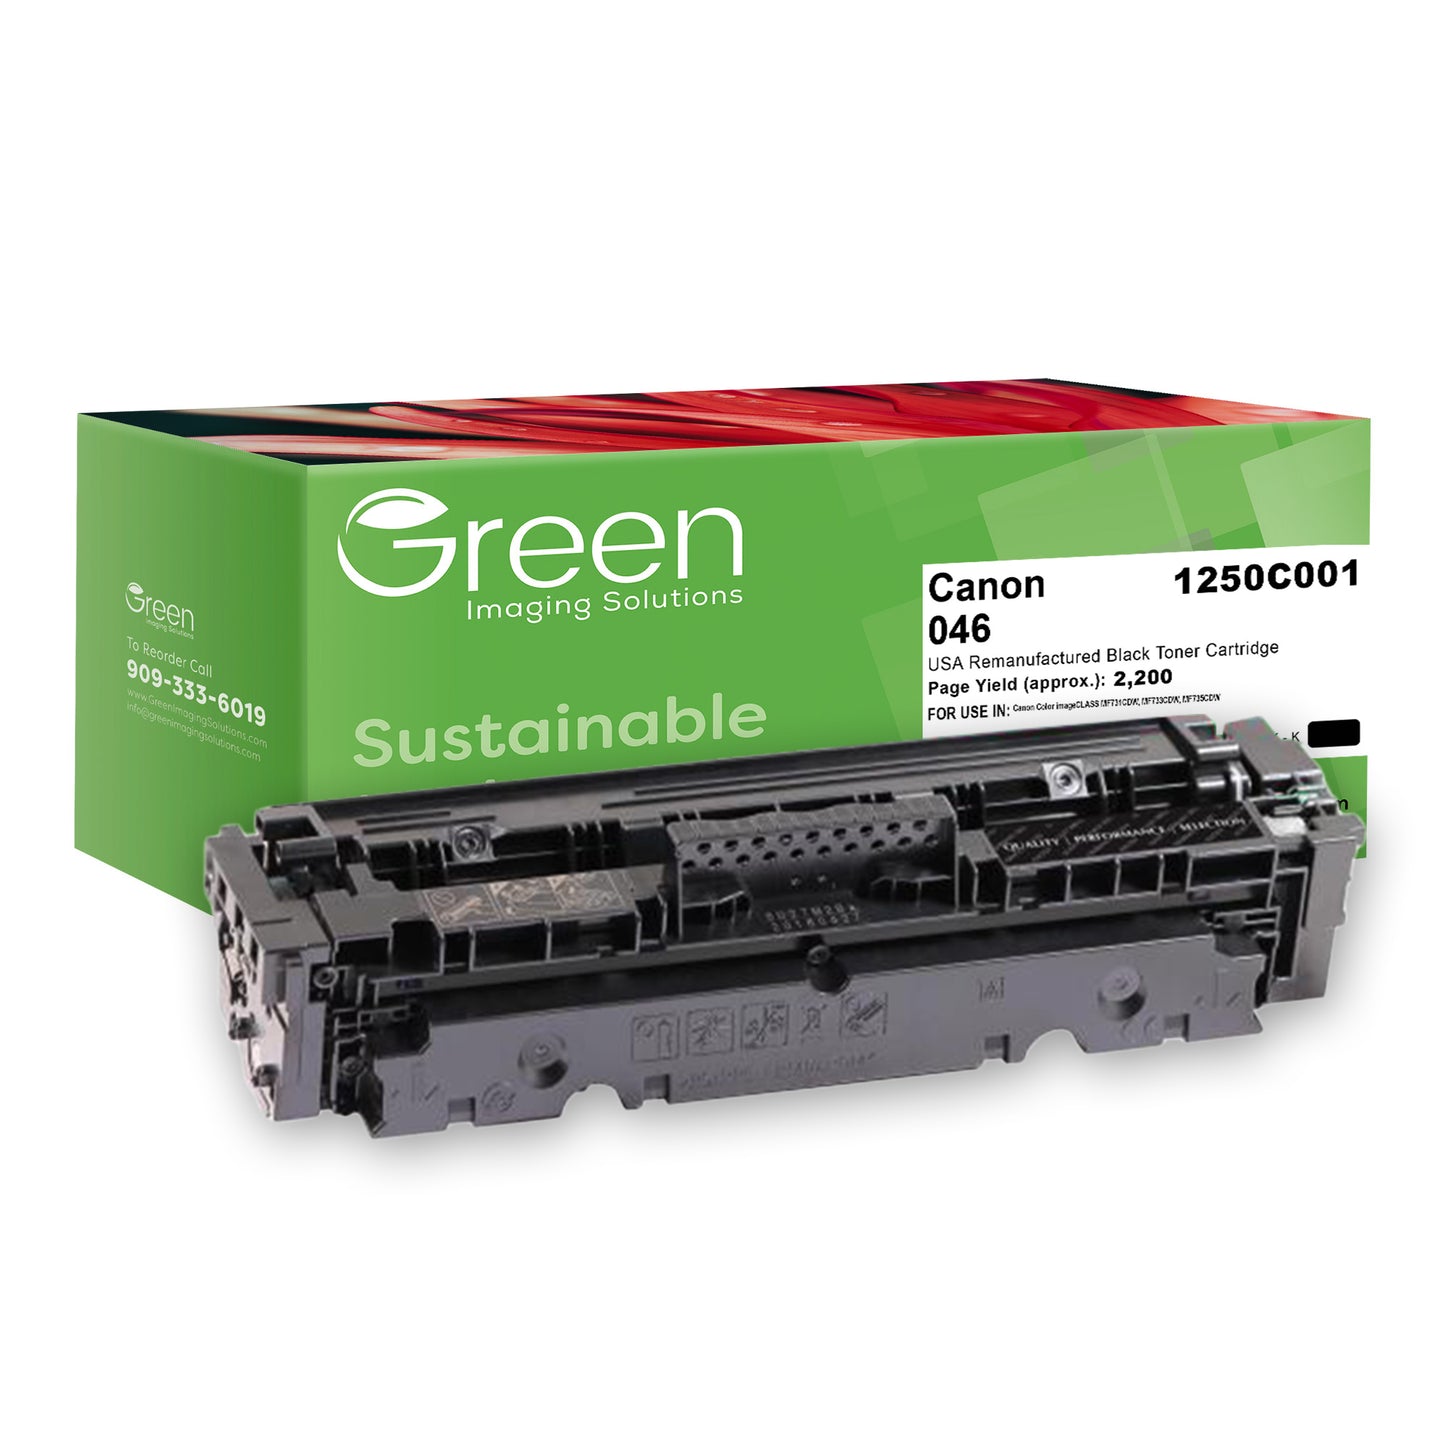 Green Imaging Solutions USA Remanufactured Black Toner Cartridge for Canon 1250C001 (046)